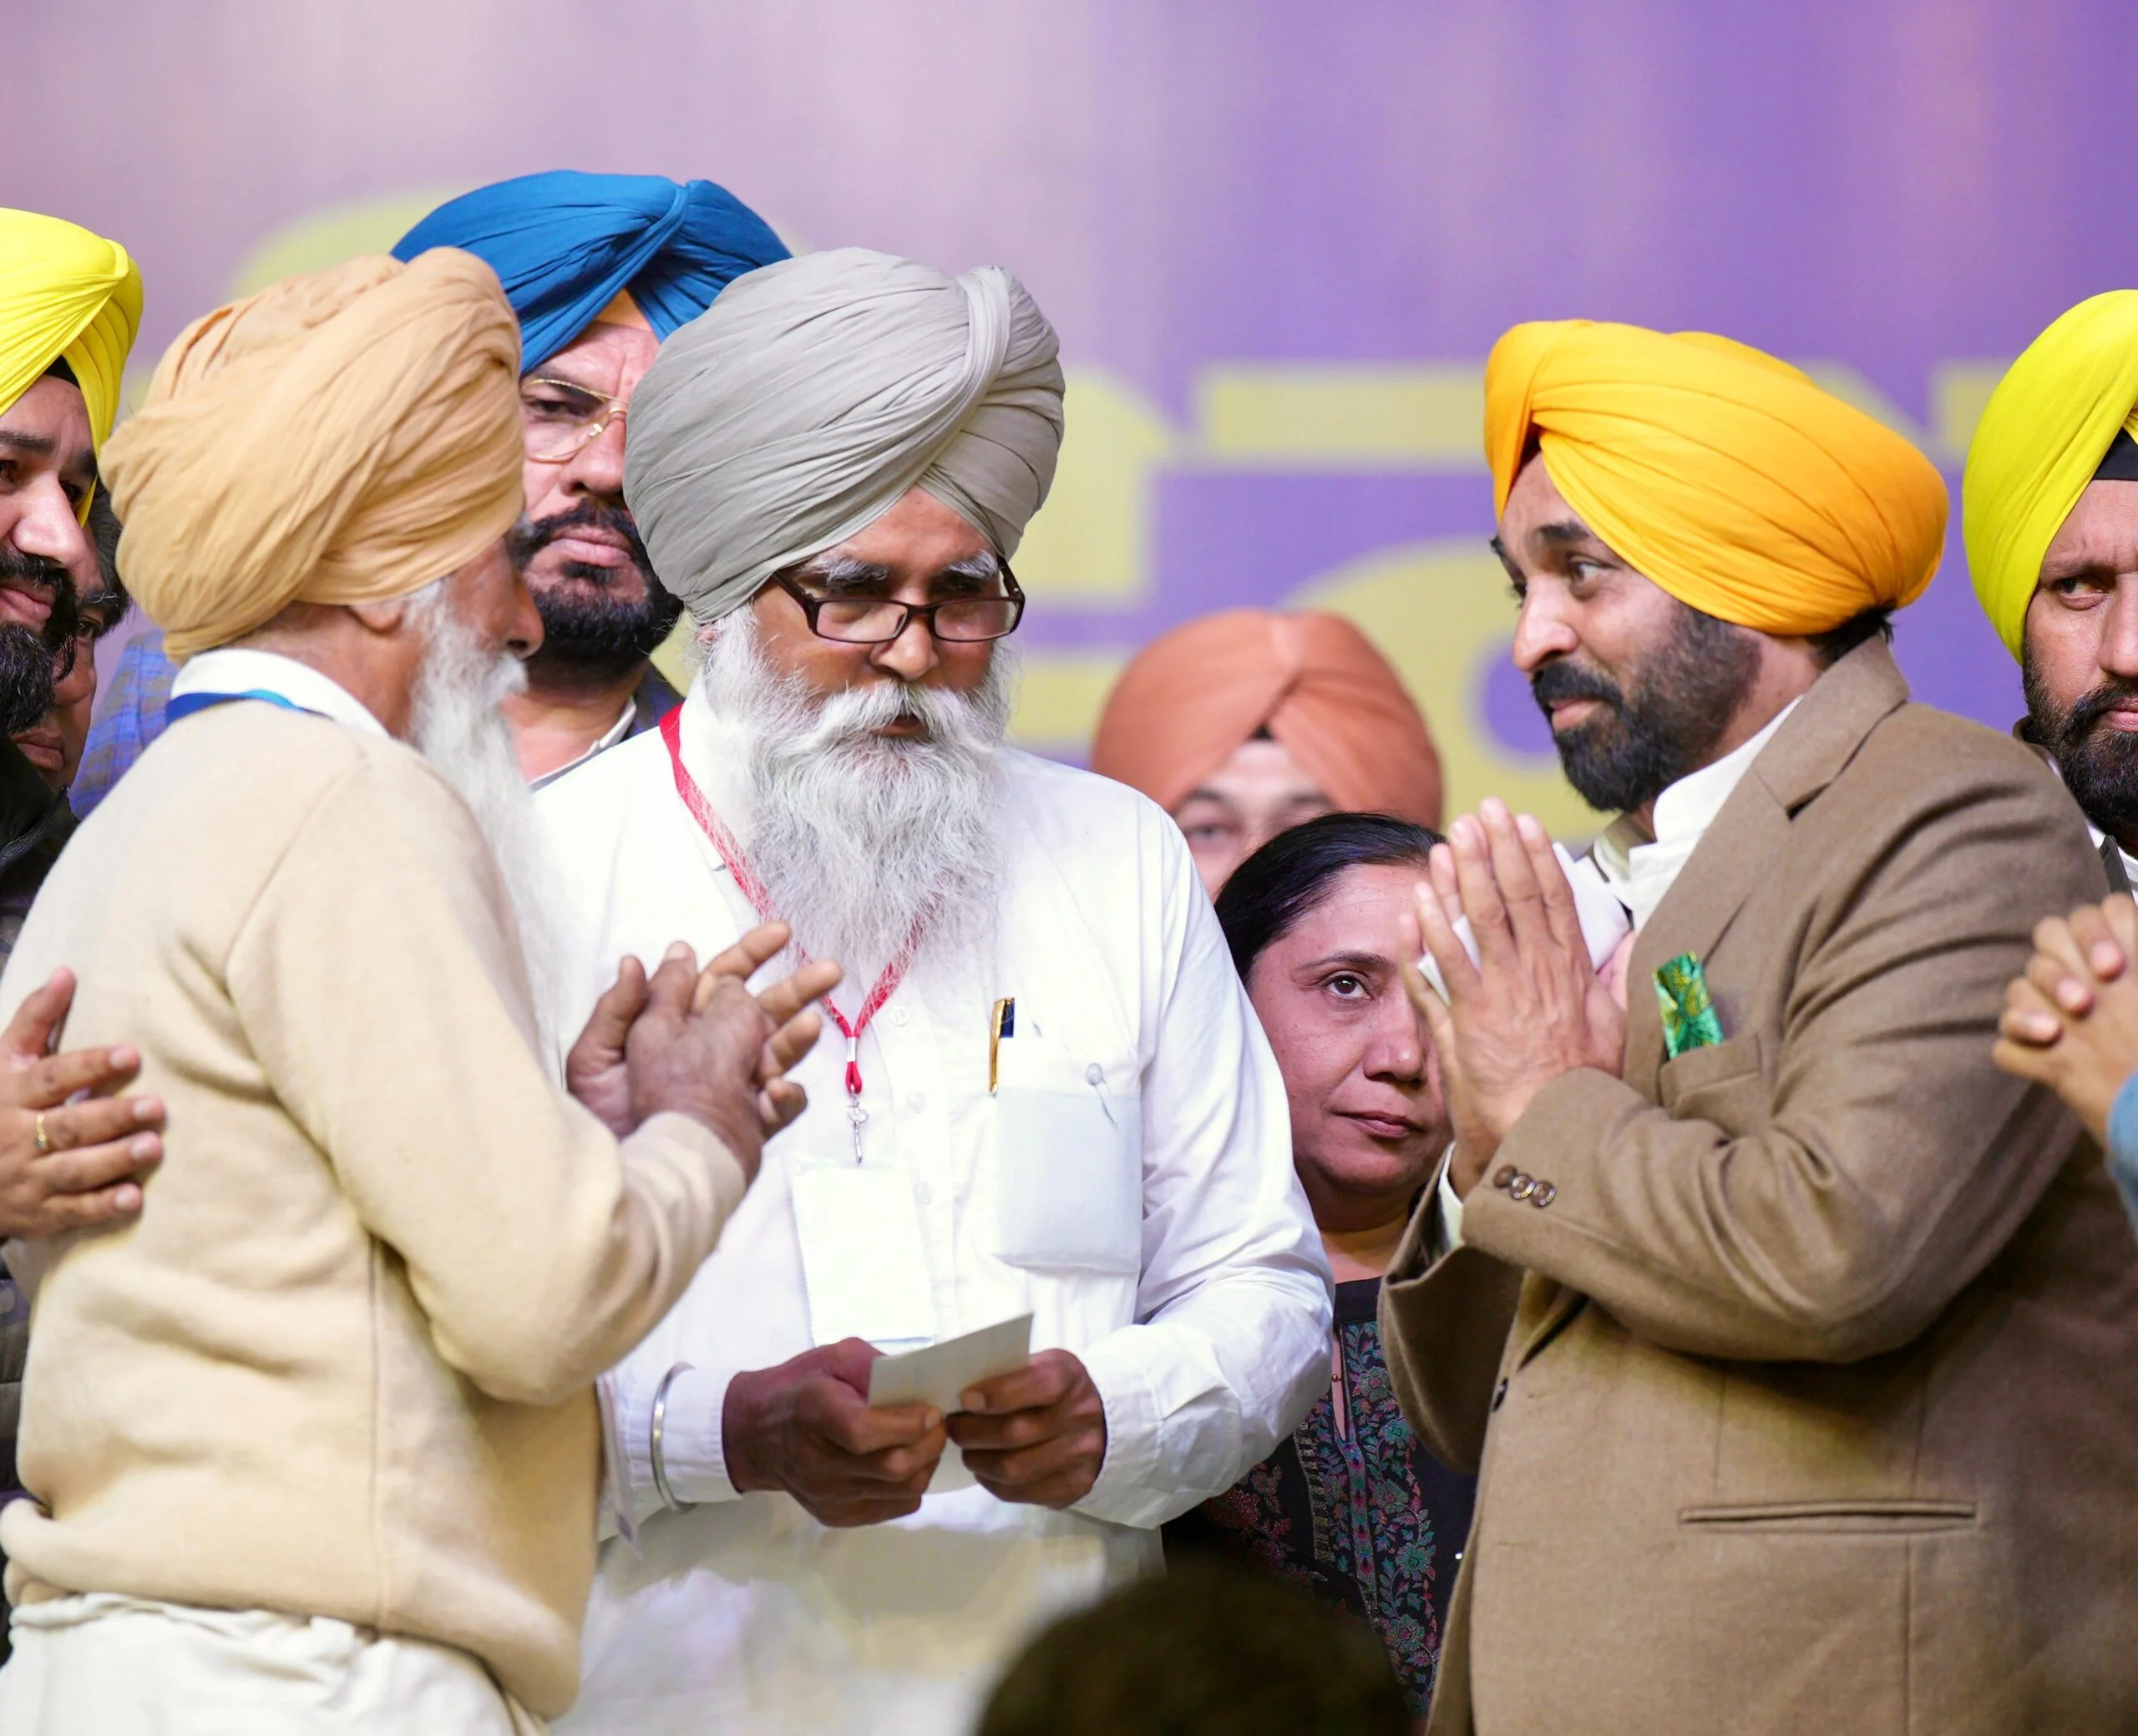 FINANCIAL ASSISTANCE TO FAMILY OF MARTYR AMRIK SINGH